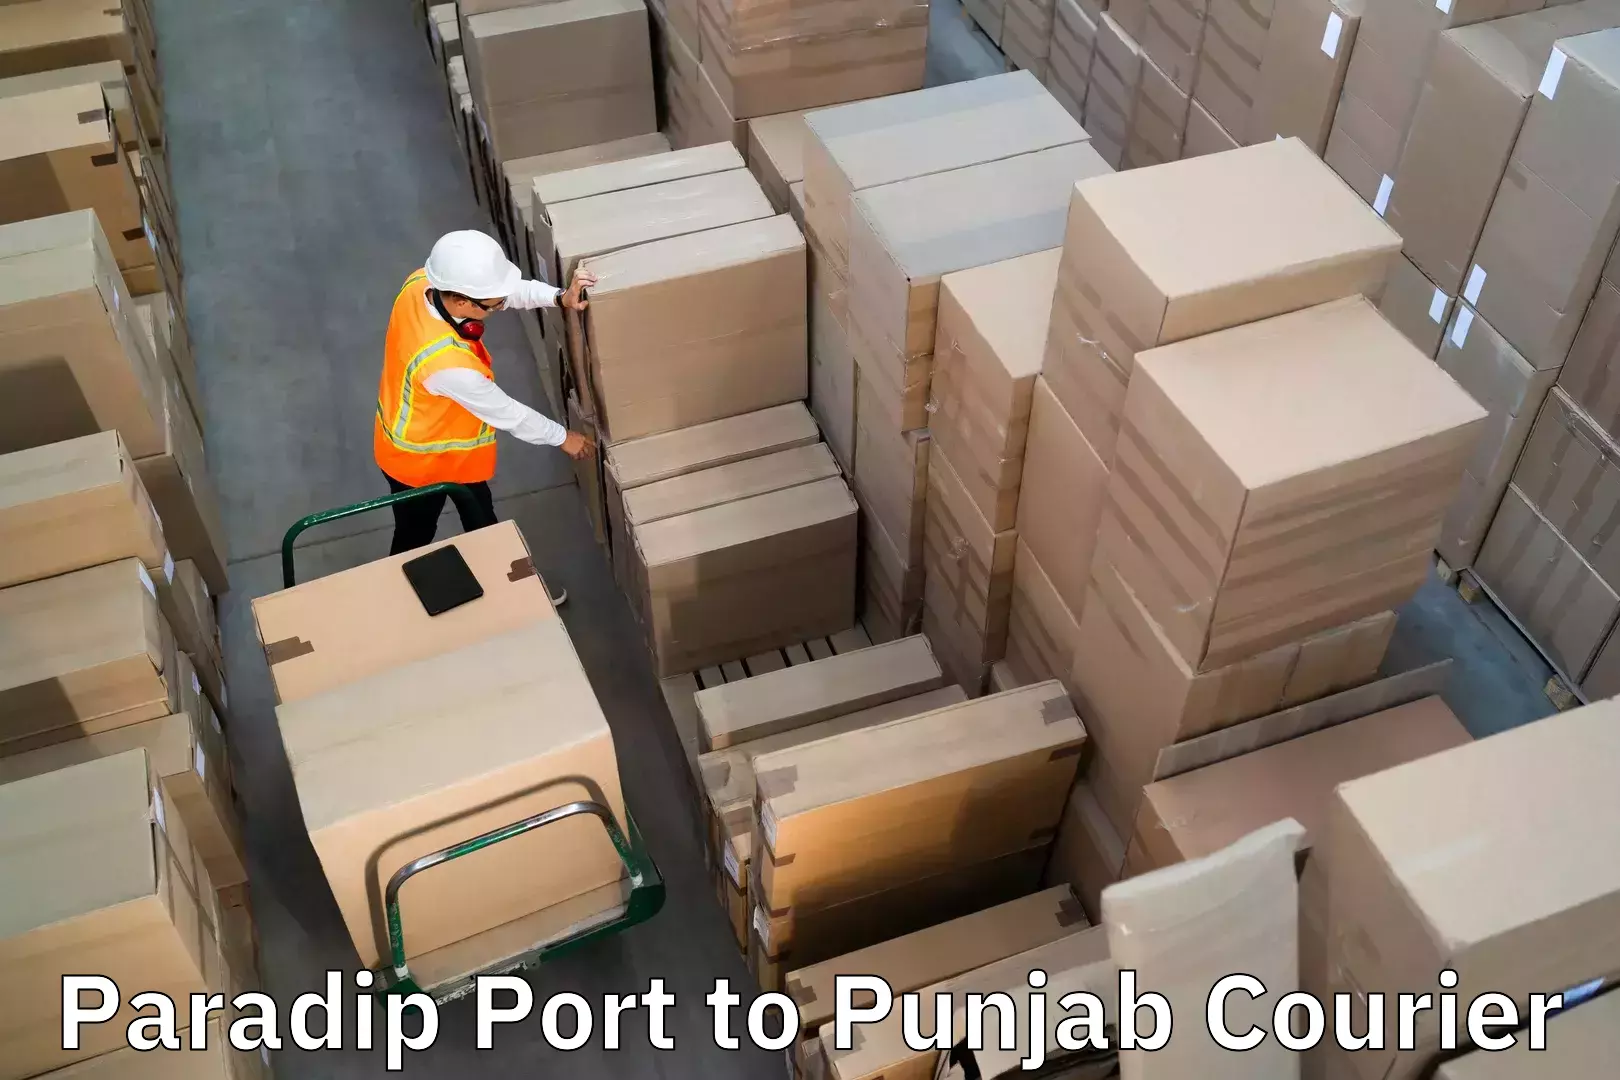 Excess baggage transport in Paradip Port to Malerkotla